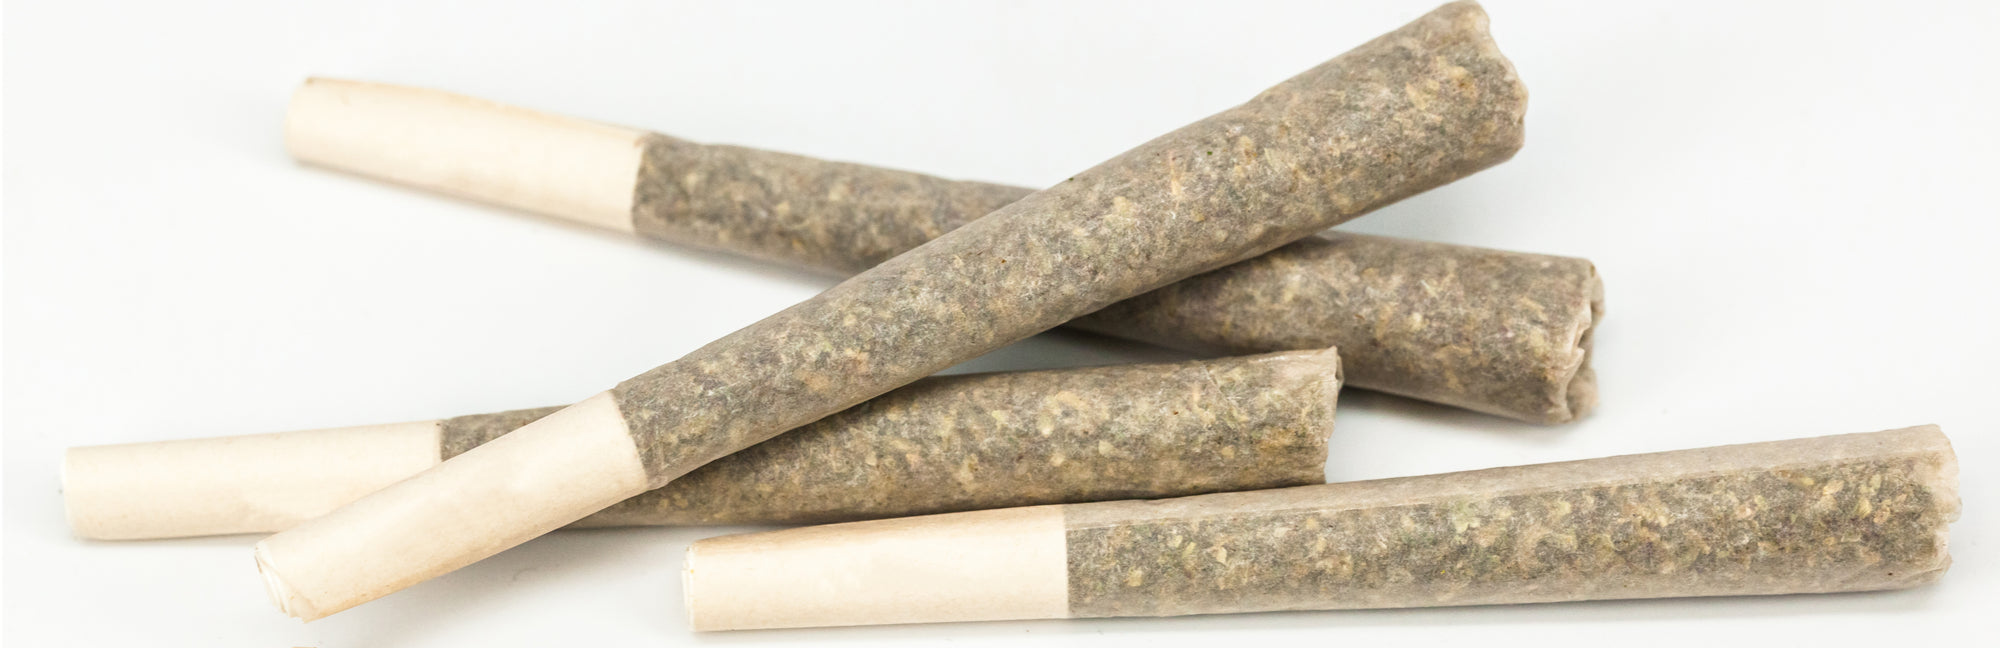 How to Roll Your Own Joint With A Filter Tip - Read More - HEMPER